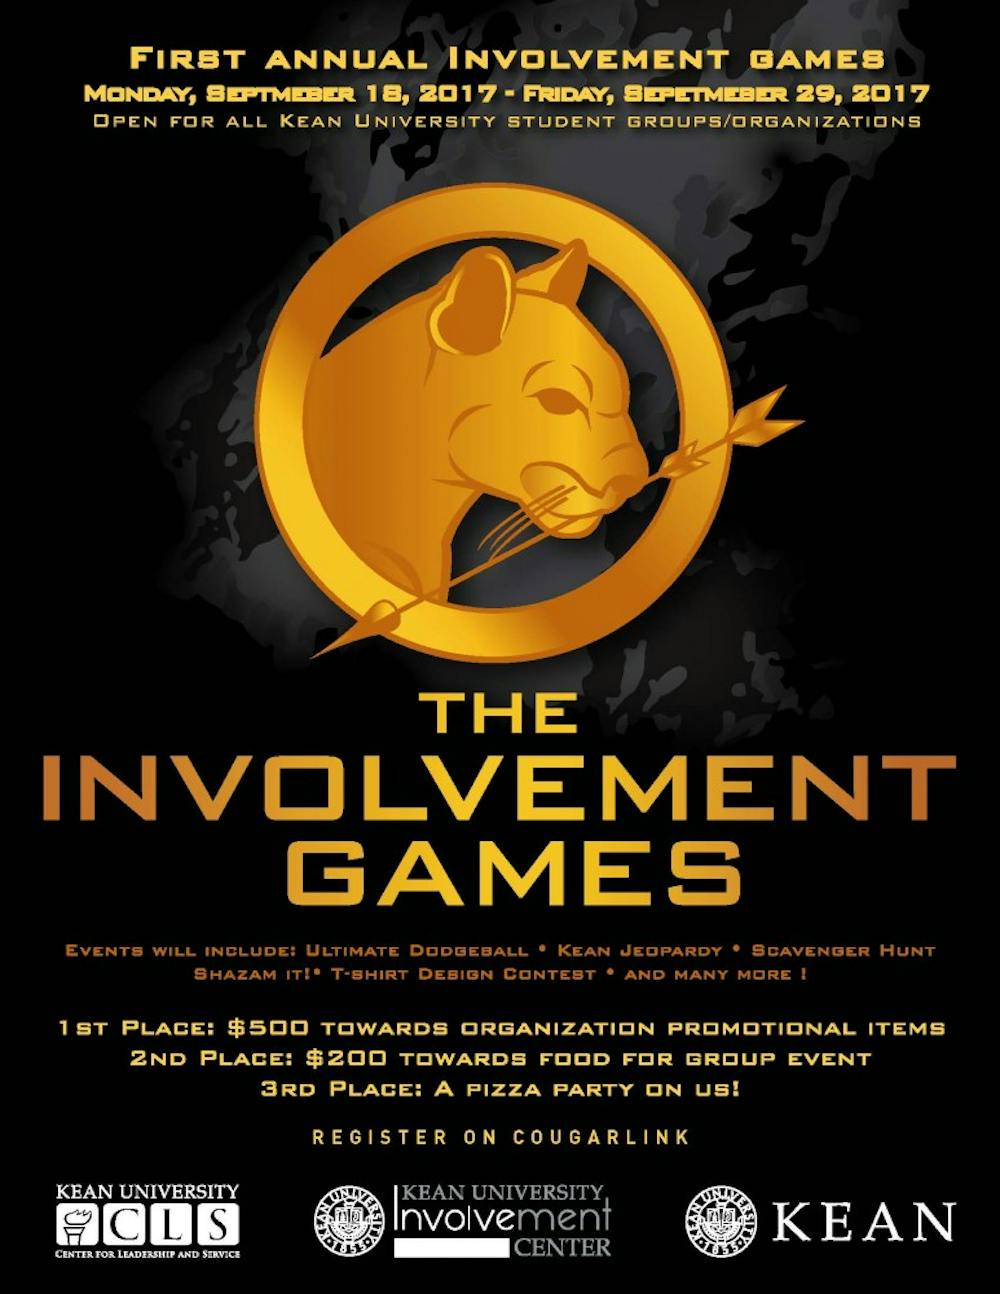 Let The Involvement Games Begin!